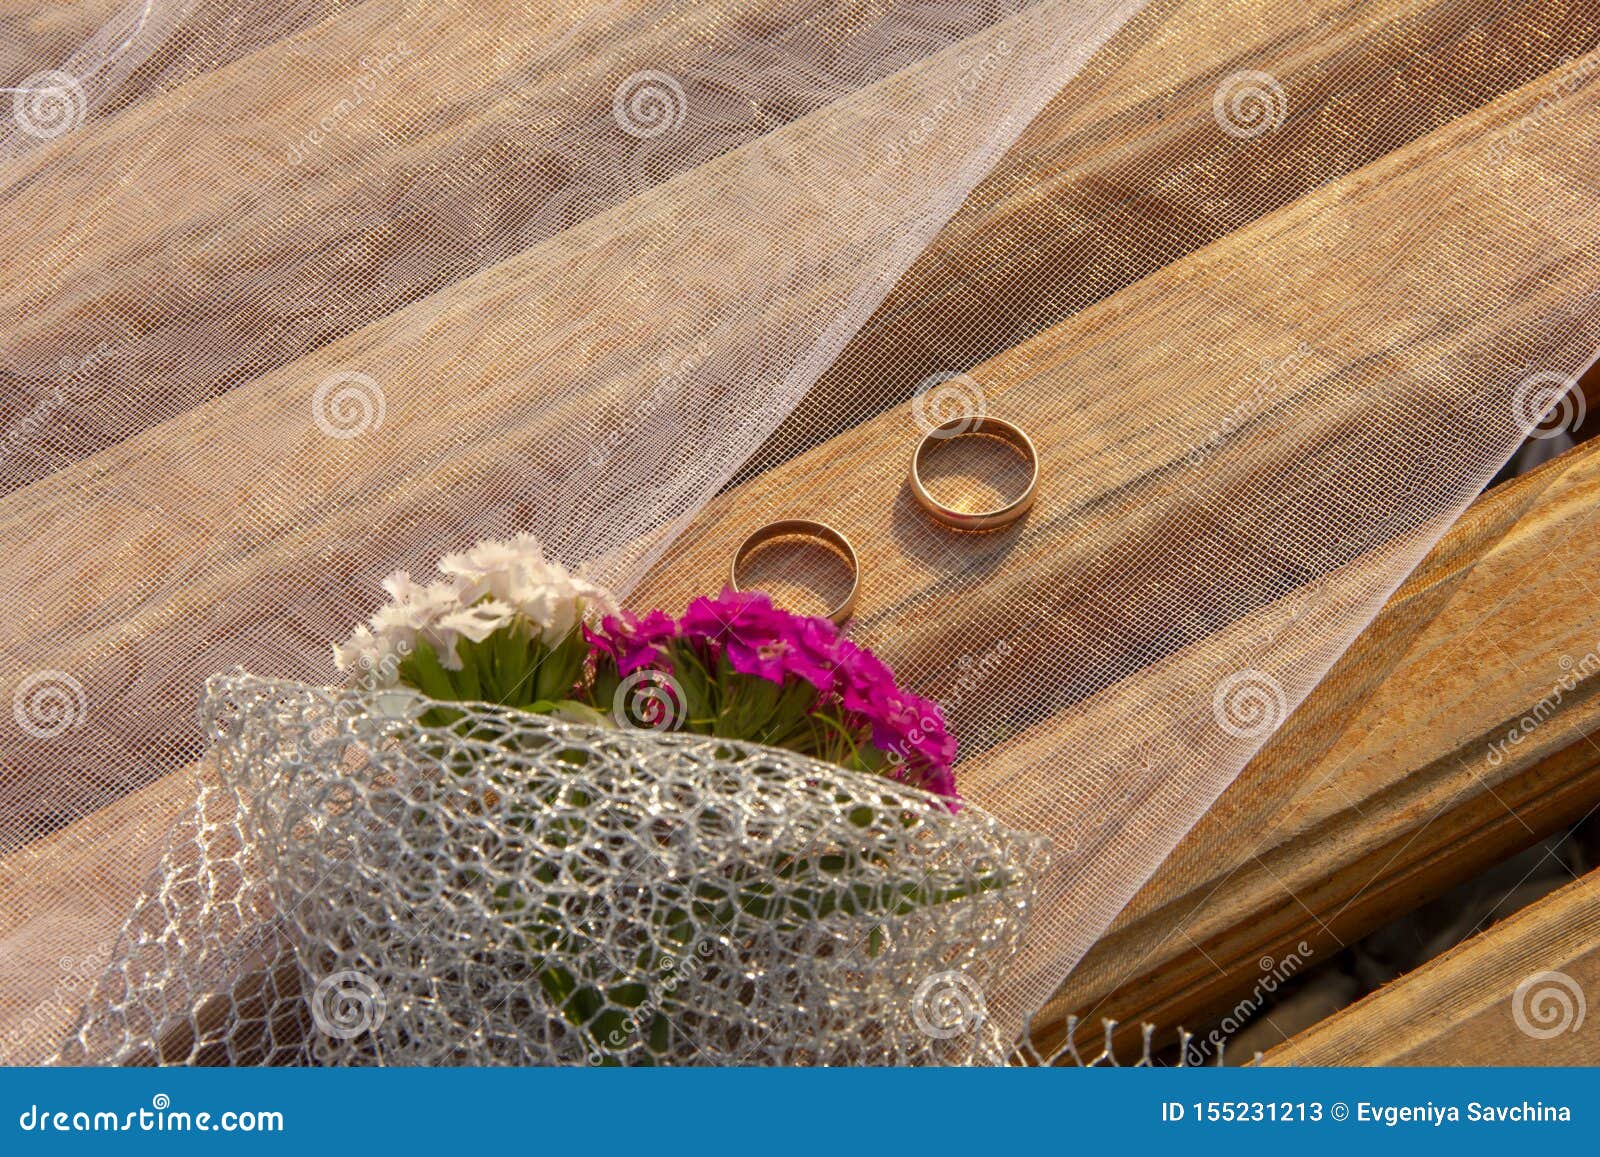 Wedding Rings Lie On A Grid. Wedding Rings Lie On The Flowers Of Carnations Stock Image - Image ...